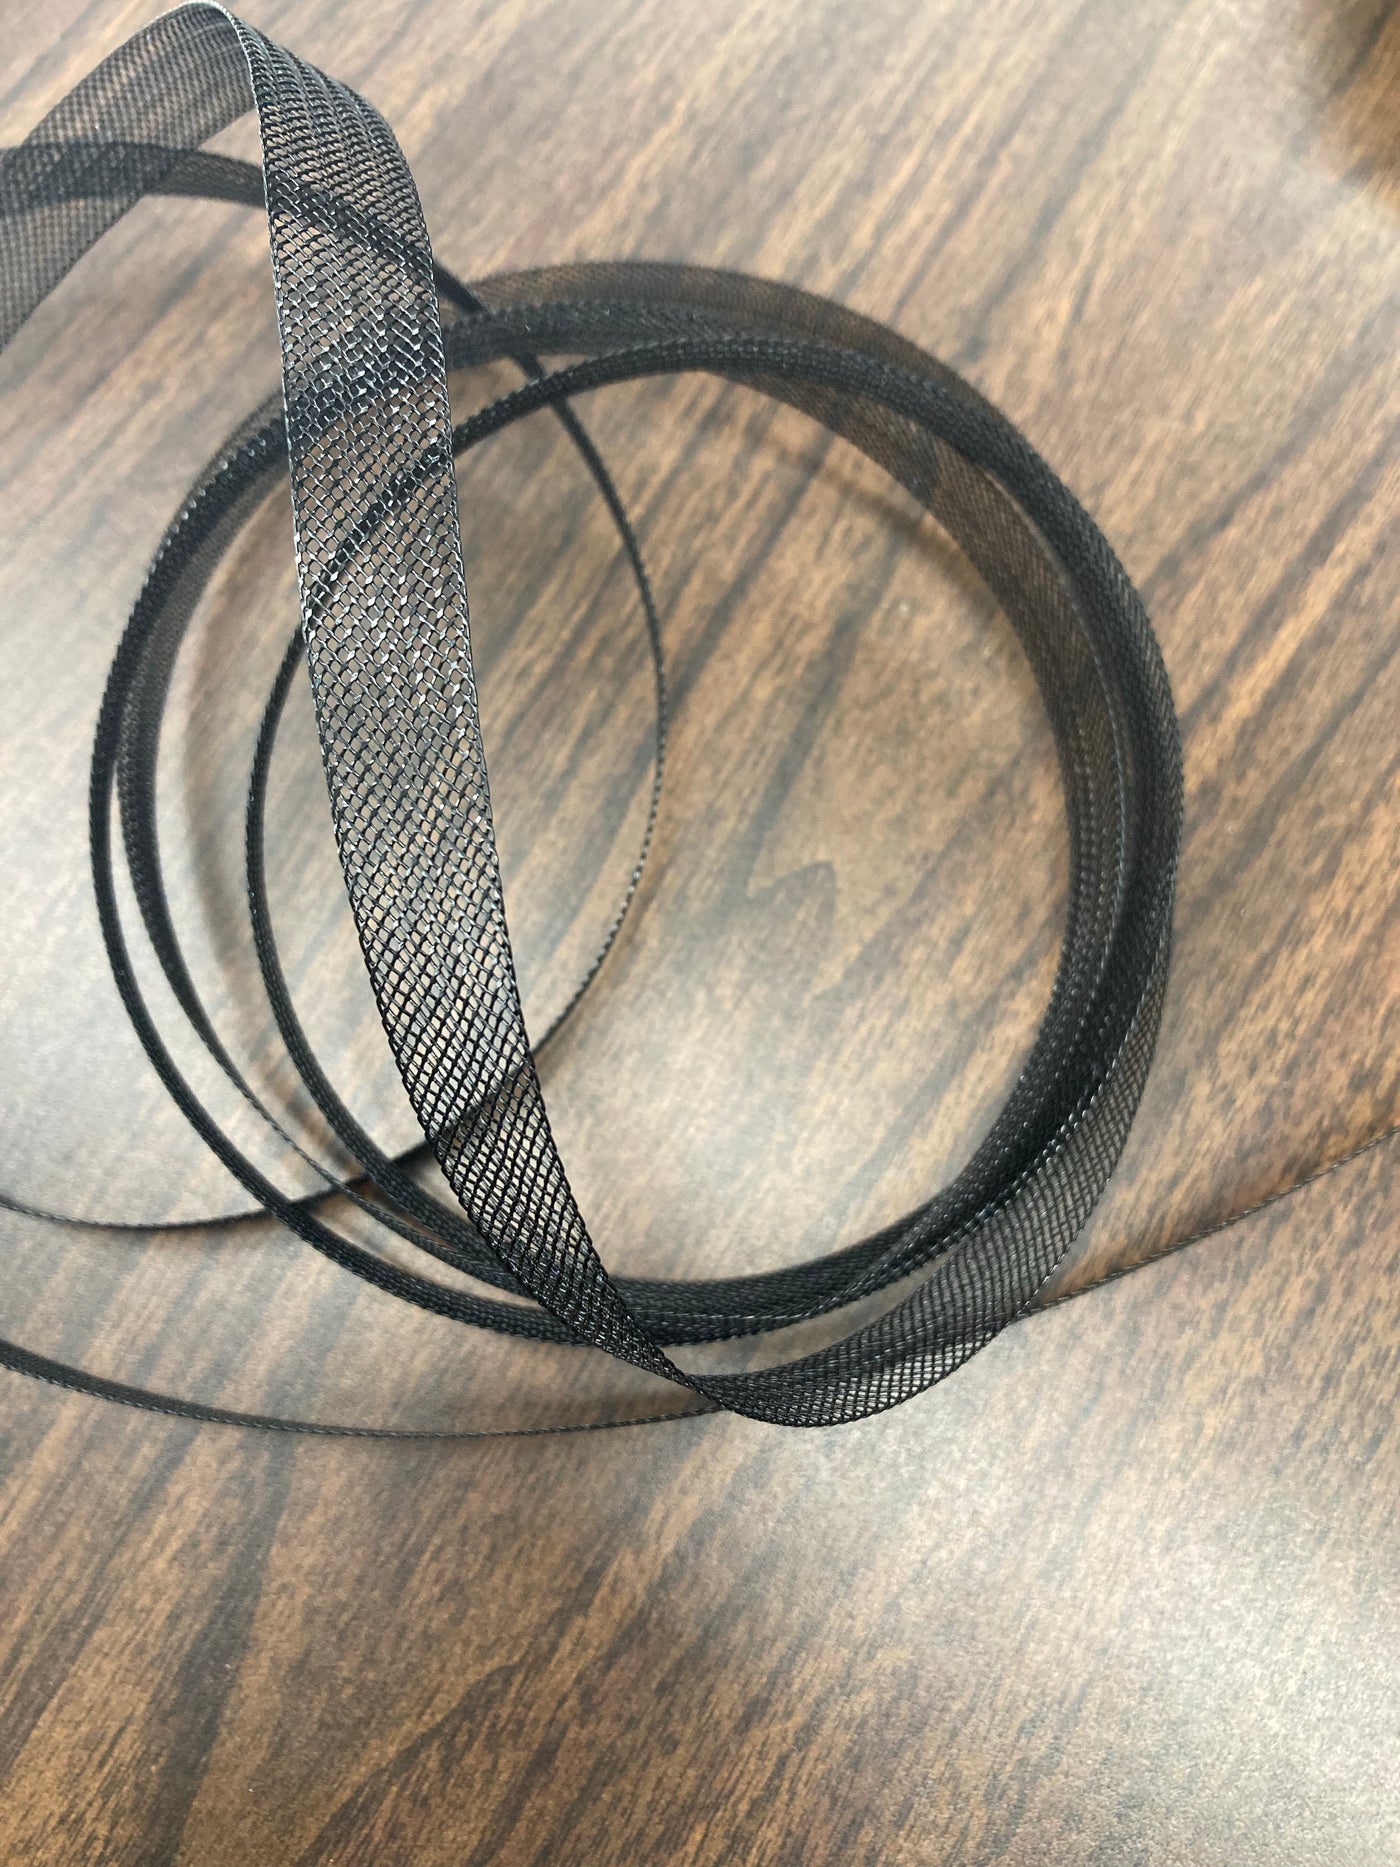 100% Polyester Black Horsehair Trim Braid Hem for Sewing Wedding Dress Gowns 1/2" Wide.  Sold by the yard.  Lace Usa